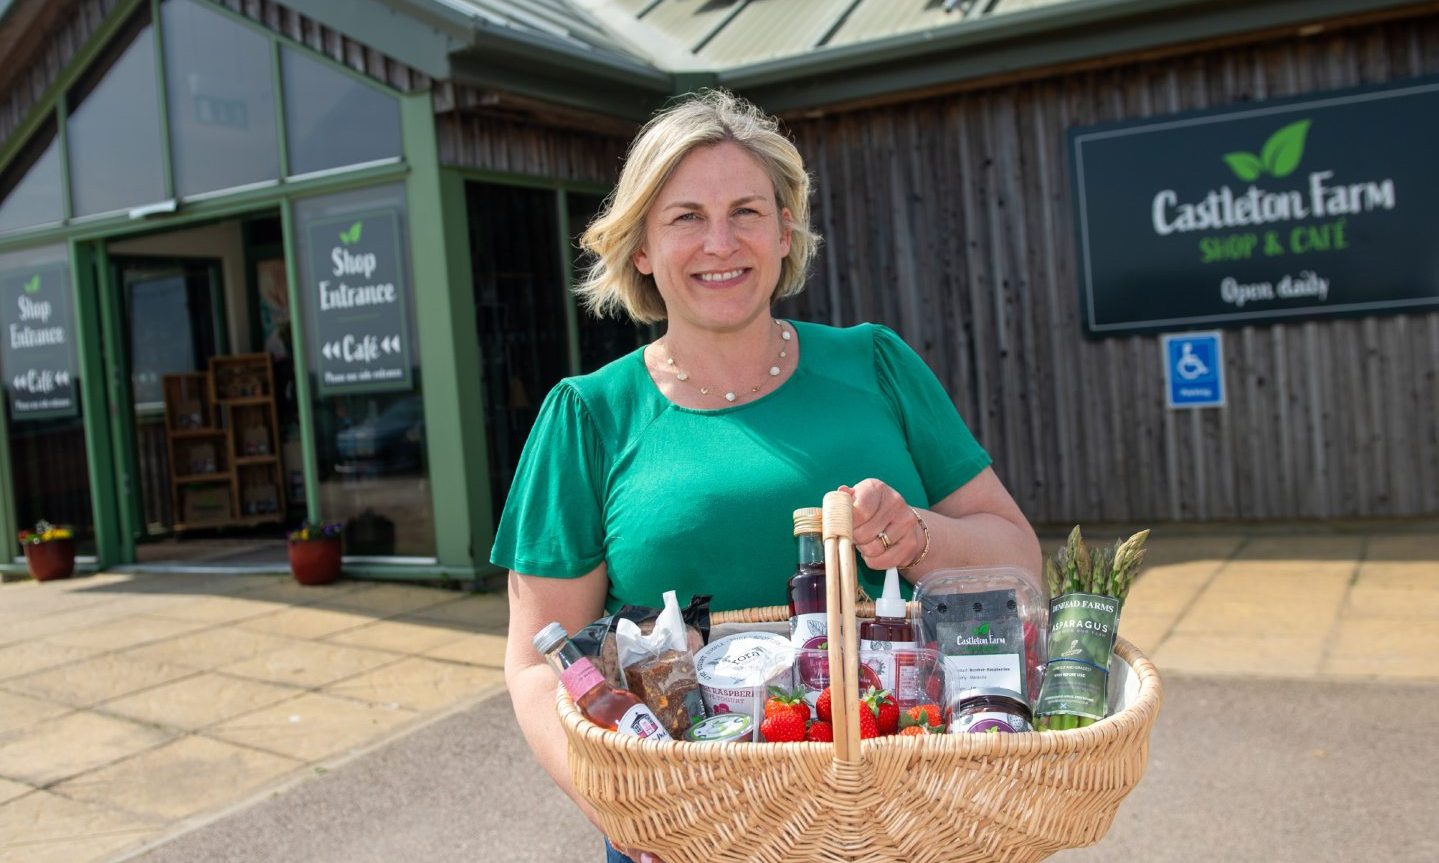 Why there’s much more to Howe of the Mearns’ Castleton Farm than ‘just fruit’